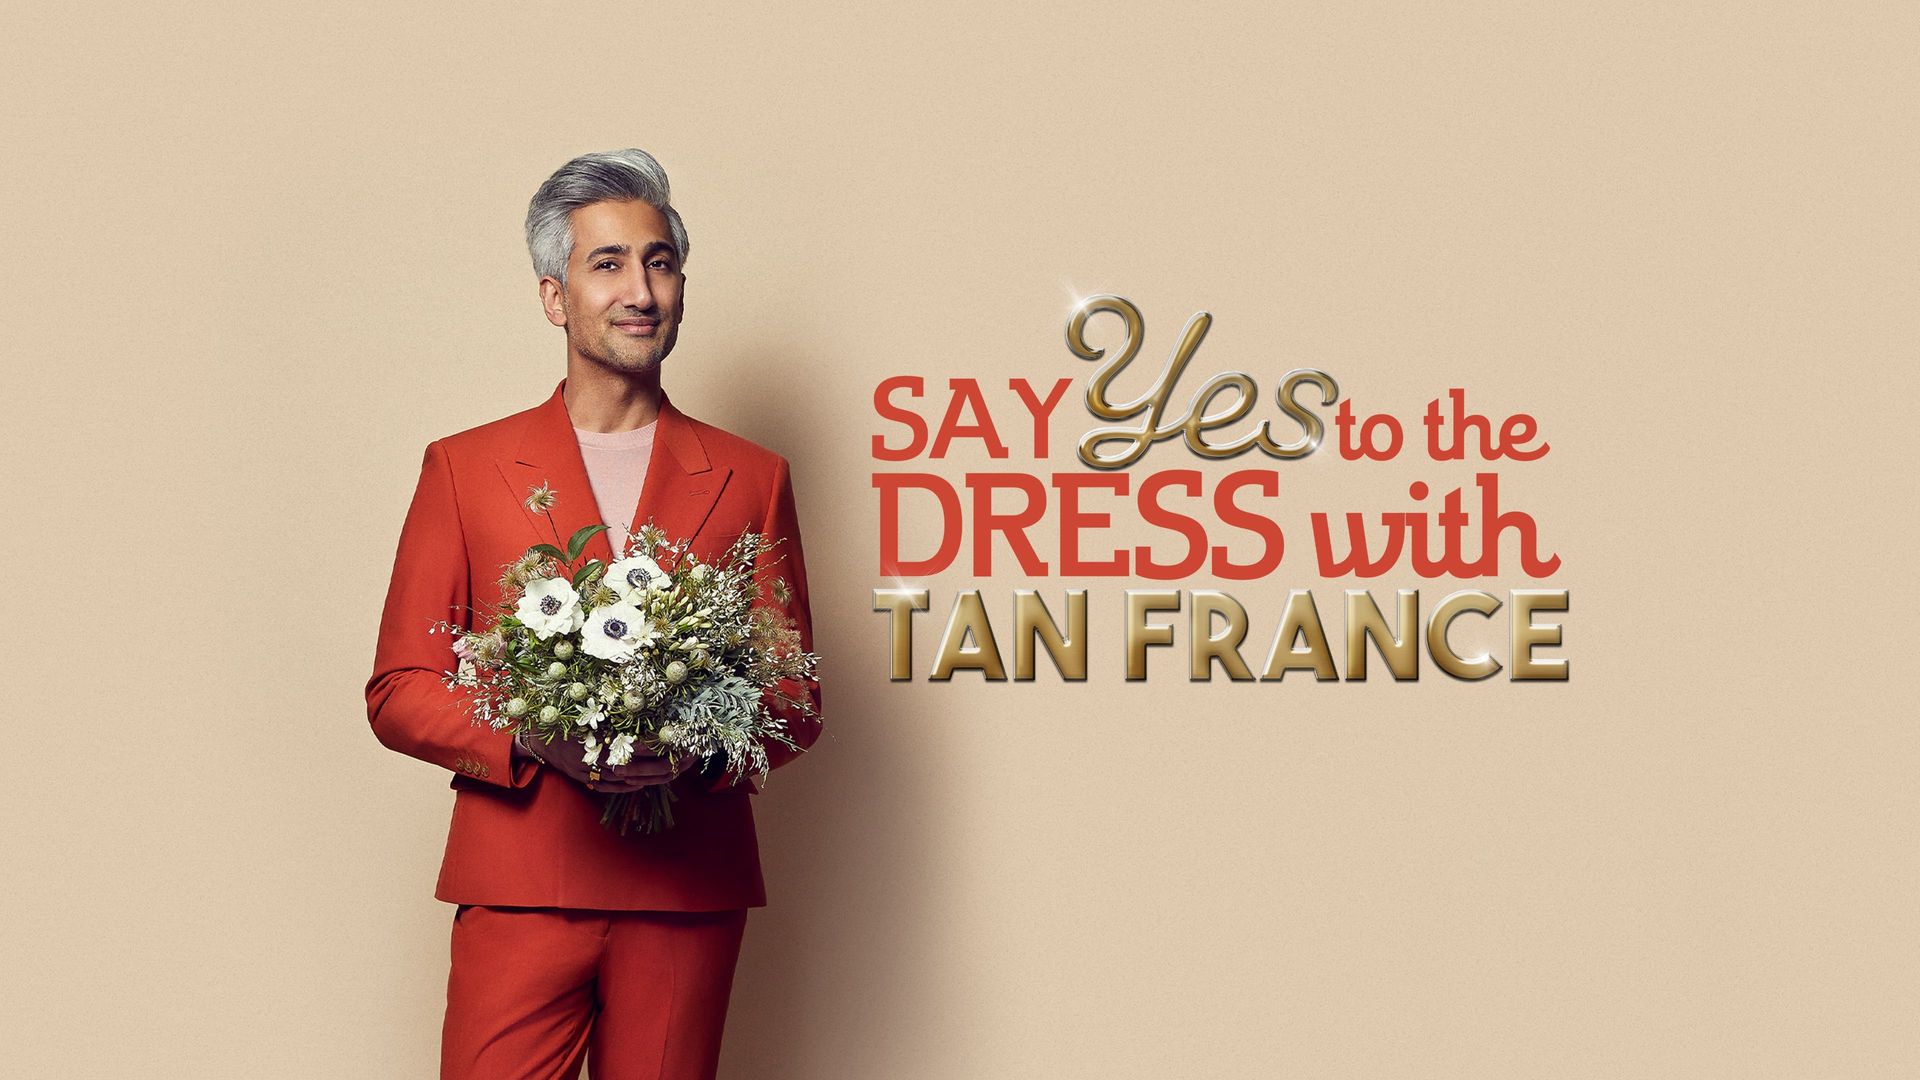 Say Yes to the Dress with Tan France background